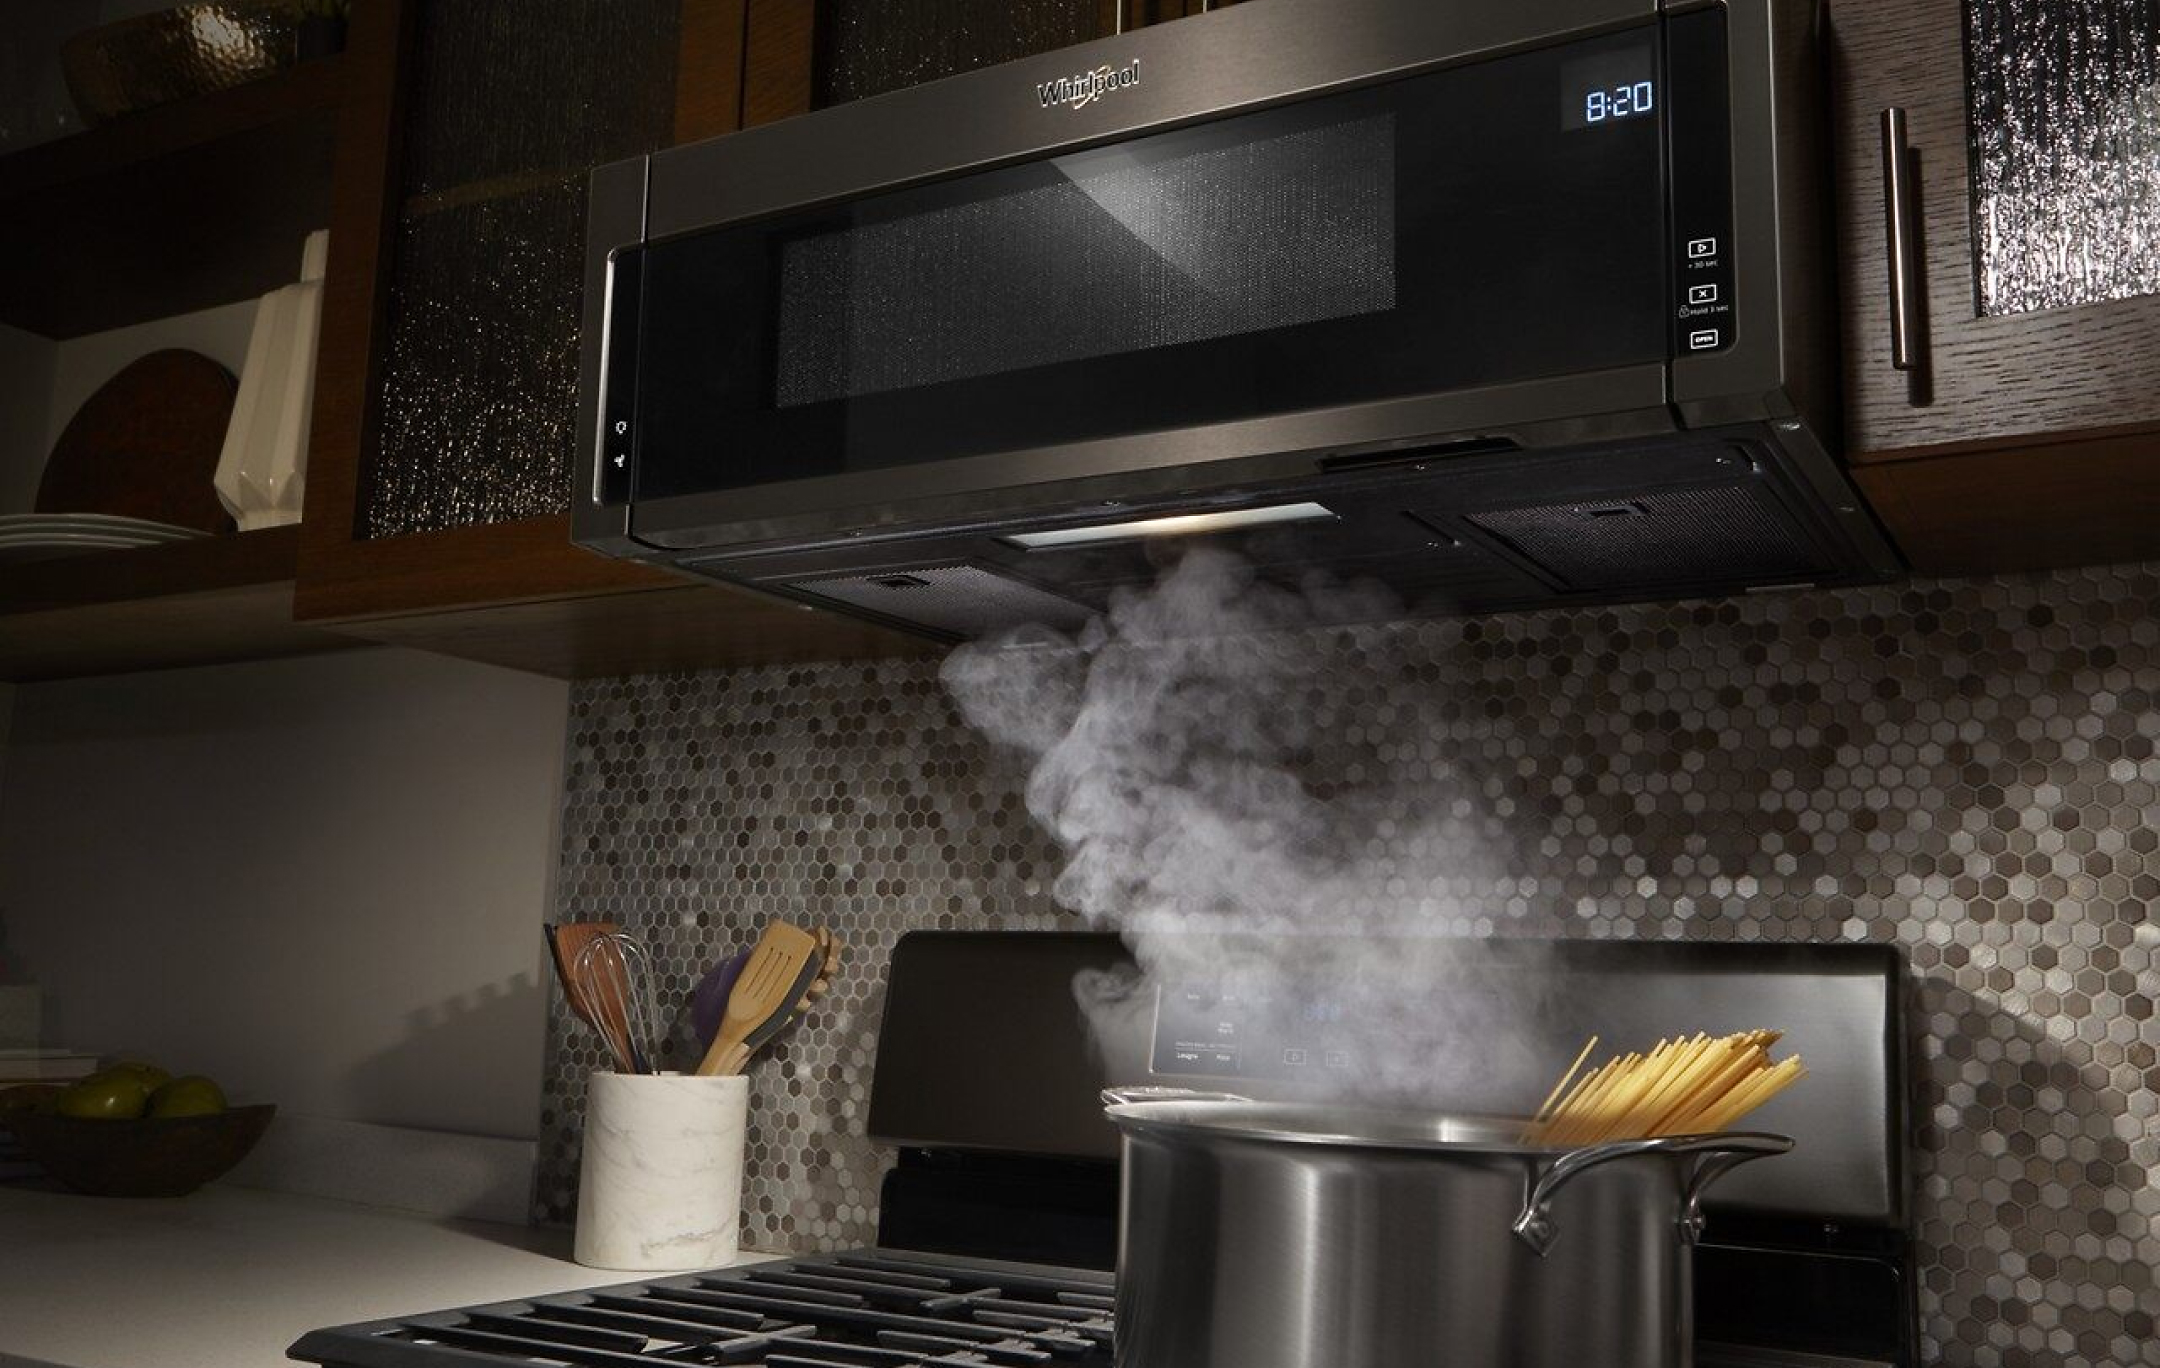 Silver and black over-the-range microwave installed with pasta steaming on the stove below